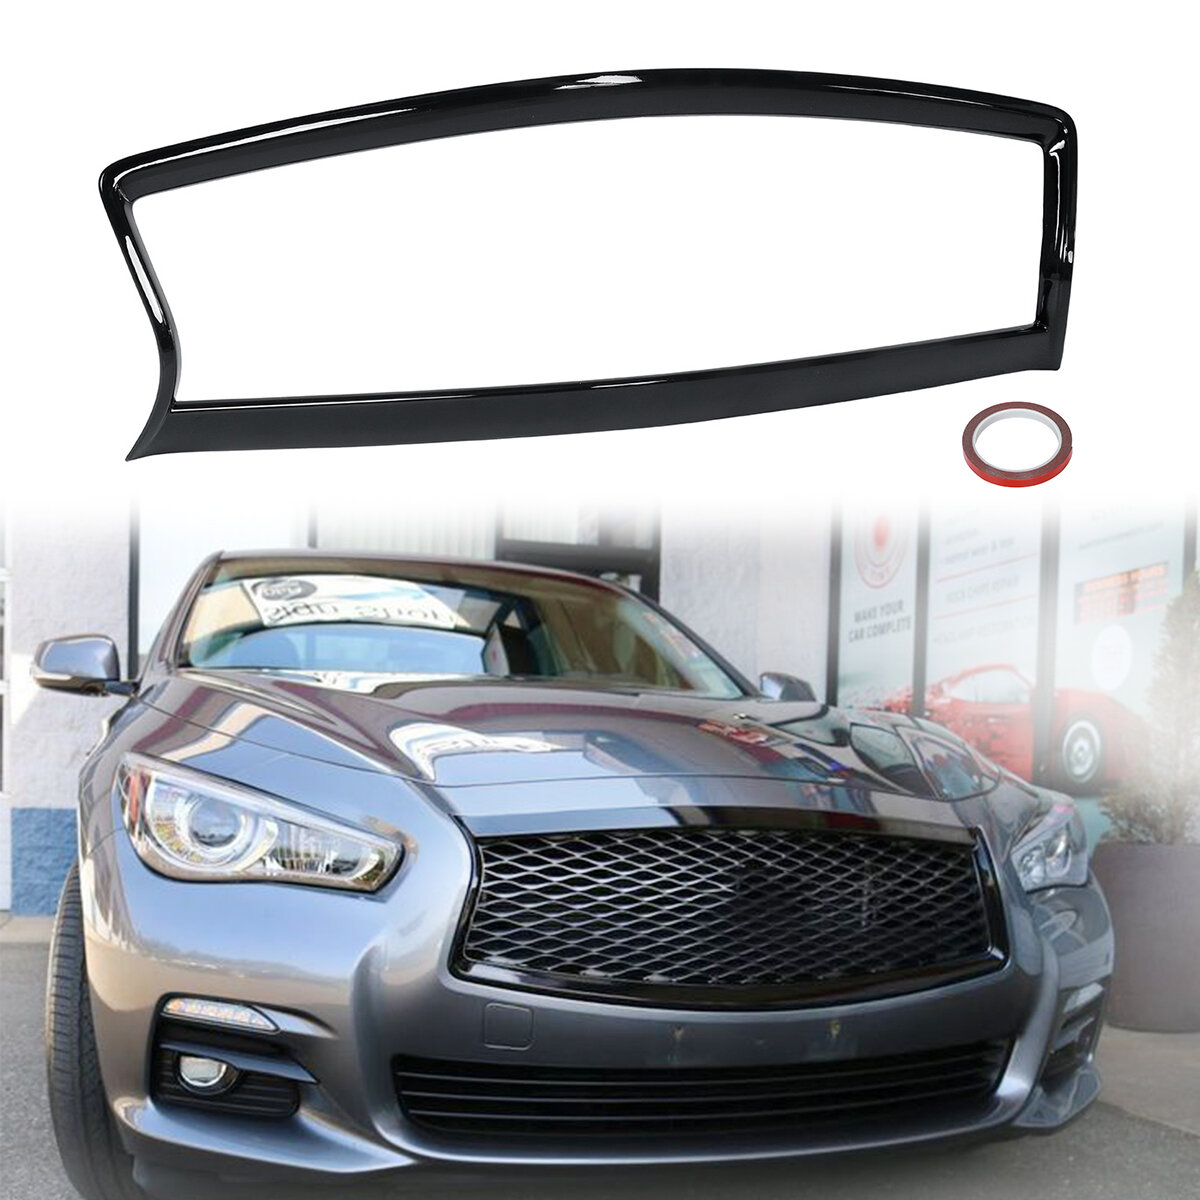 Image of Glossy Black Front Grill Outline Trim Cover Overlay For INFINITI Q50 Q50S 2014-2017